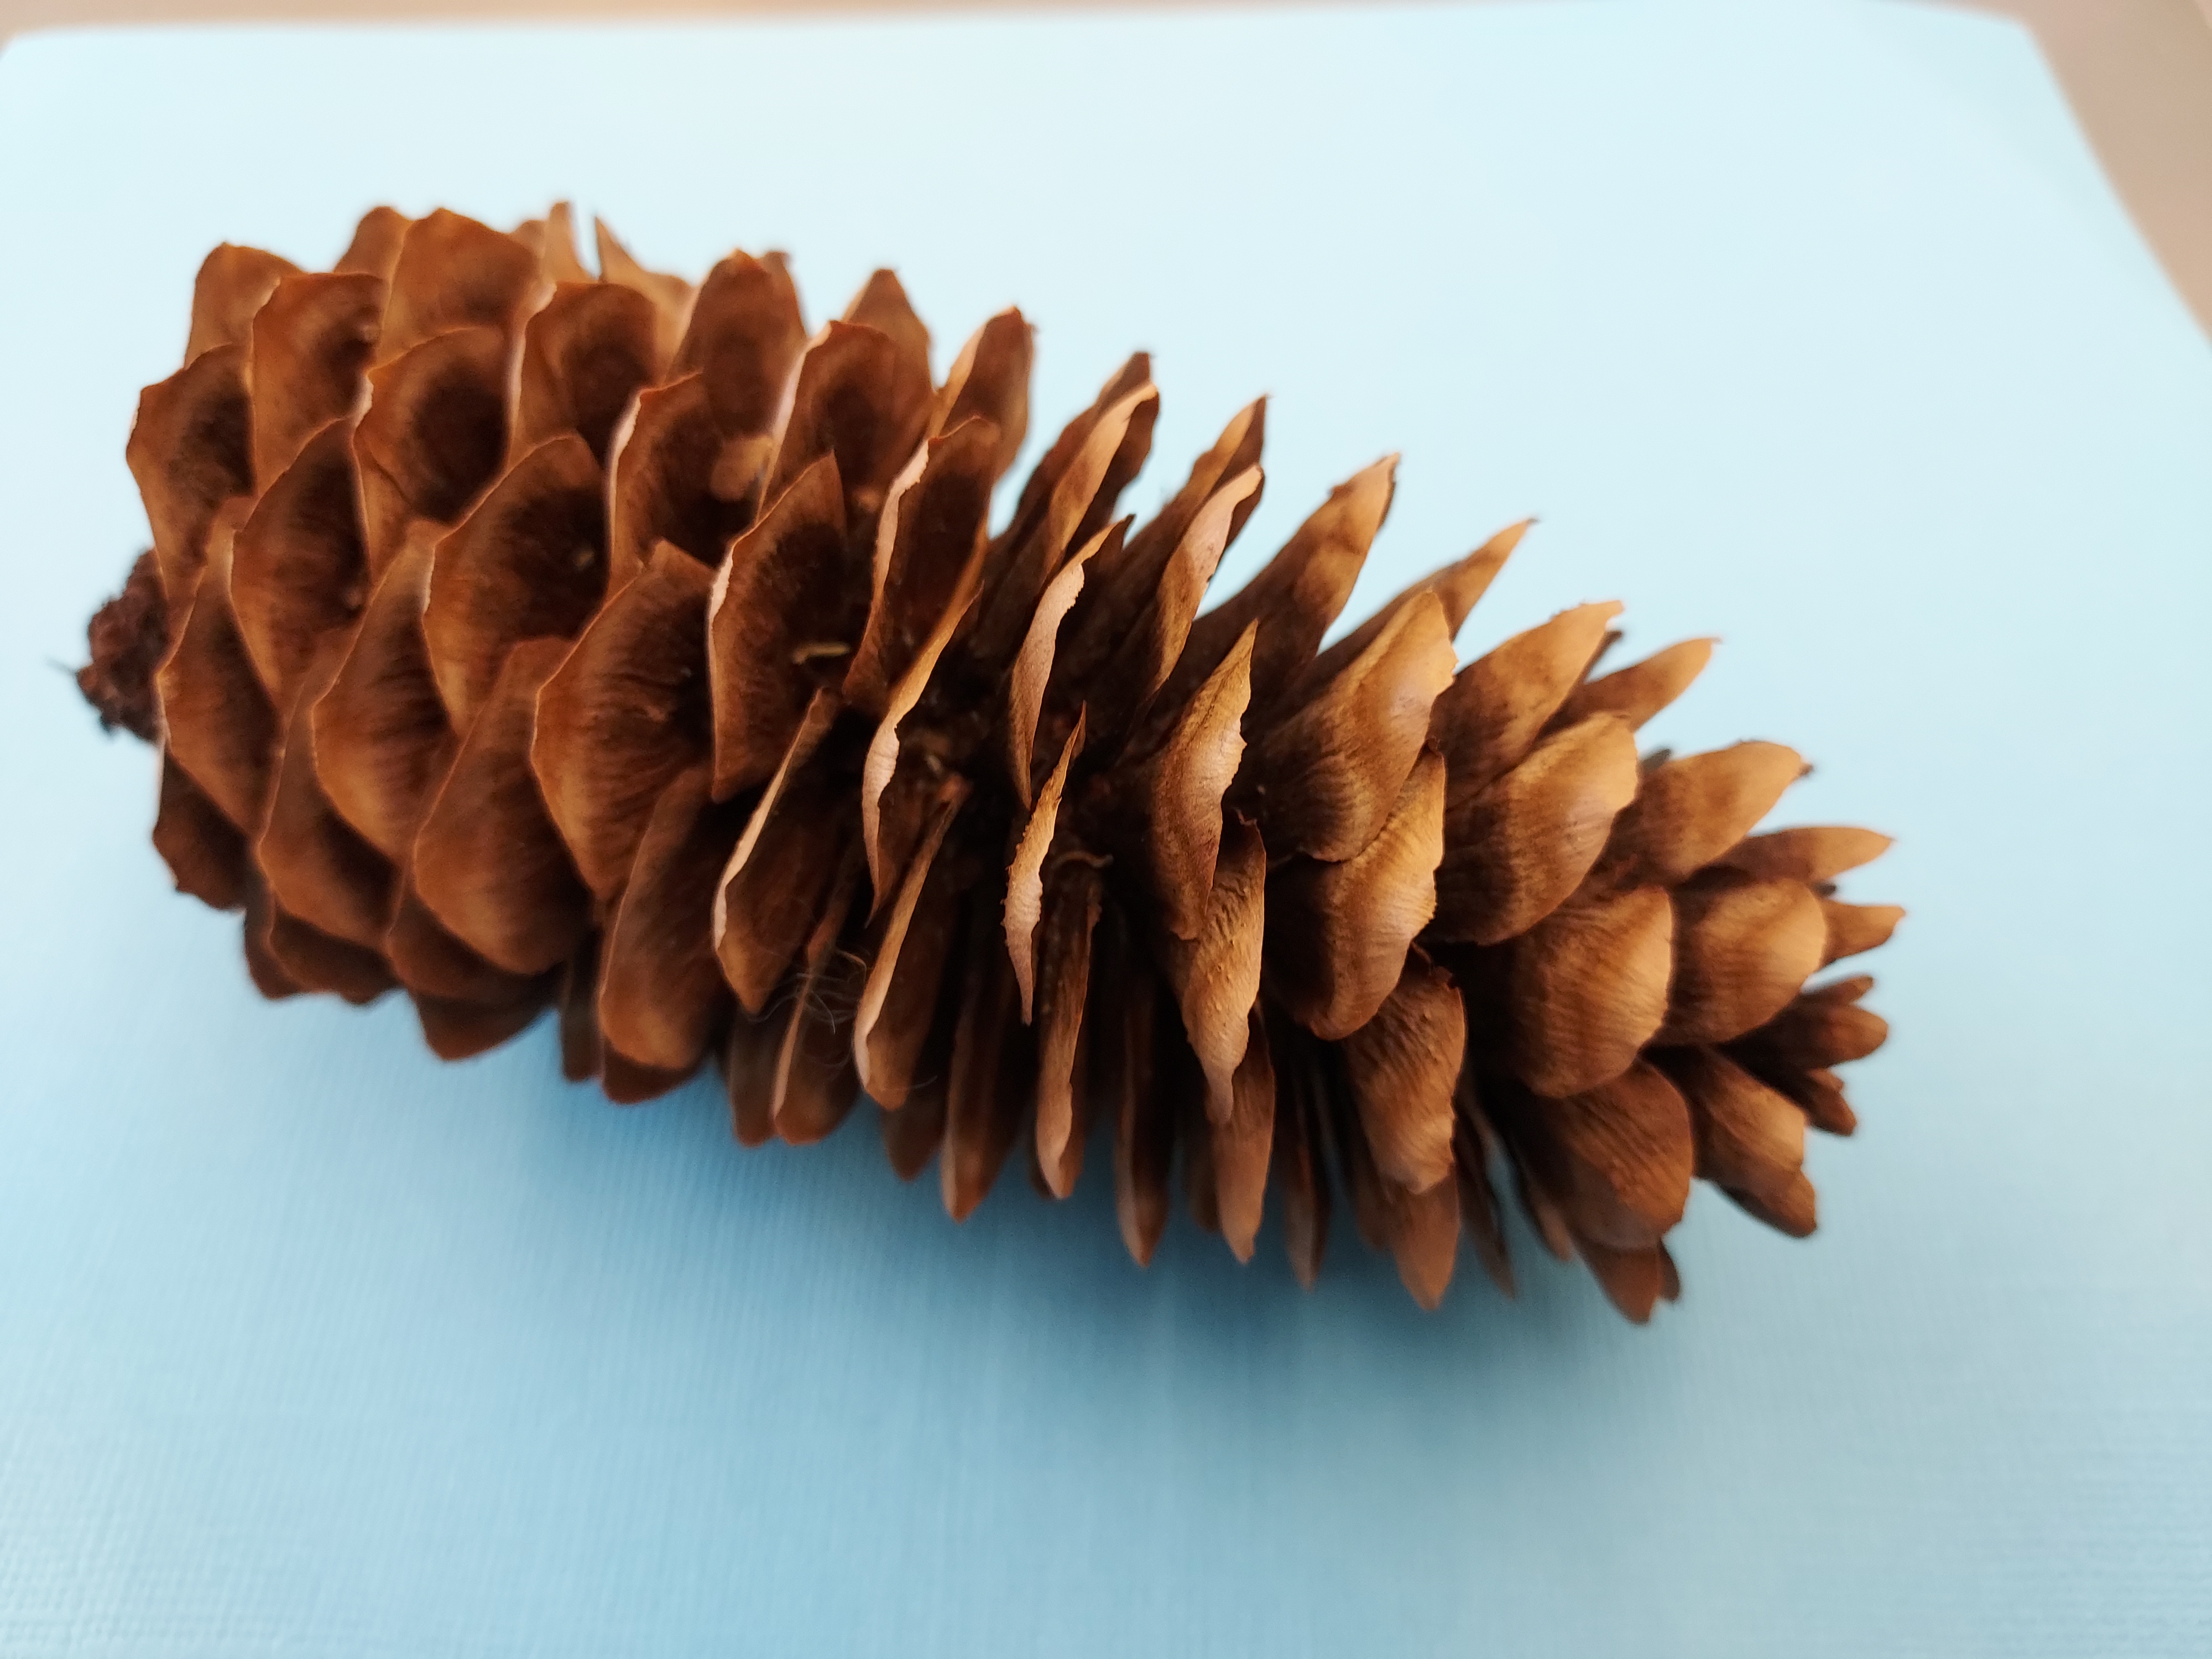 This photo shows a photo of a Norway spruce cone.